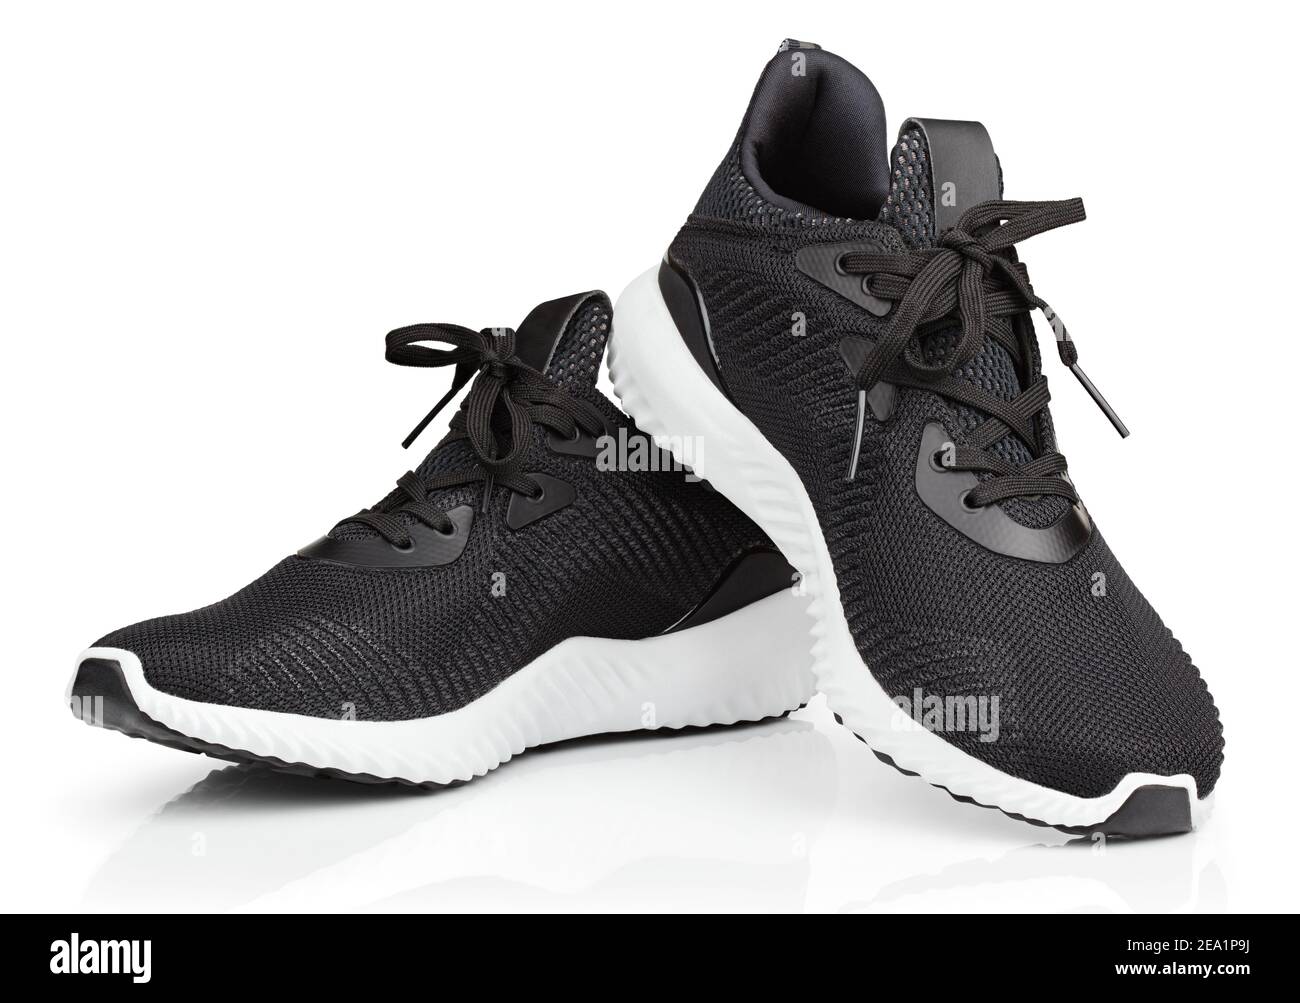 Pair of new unbranded black sport running shoes or sneakers isolated on ...